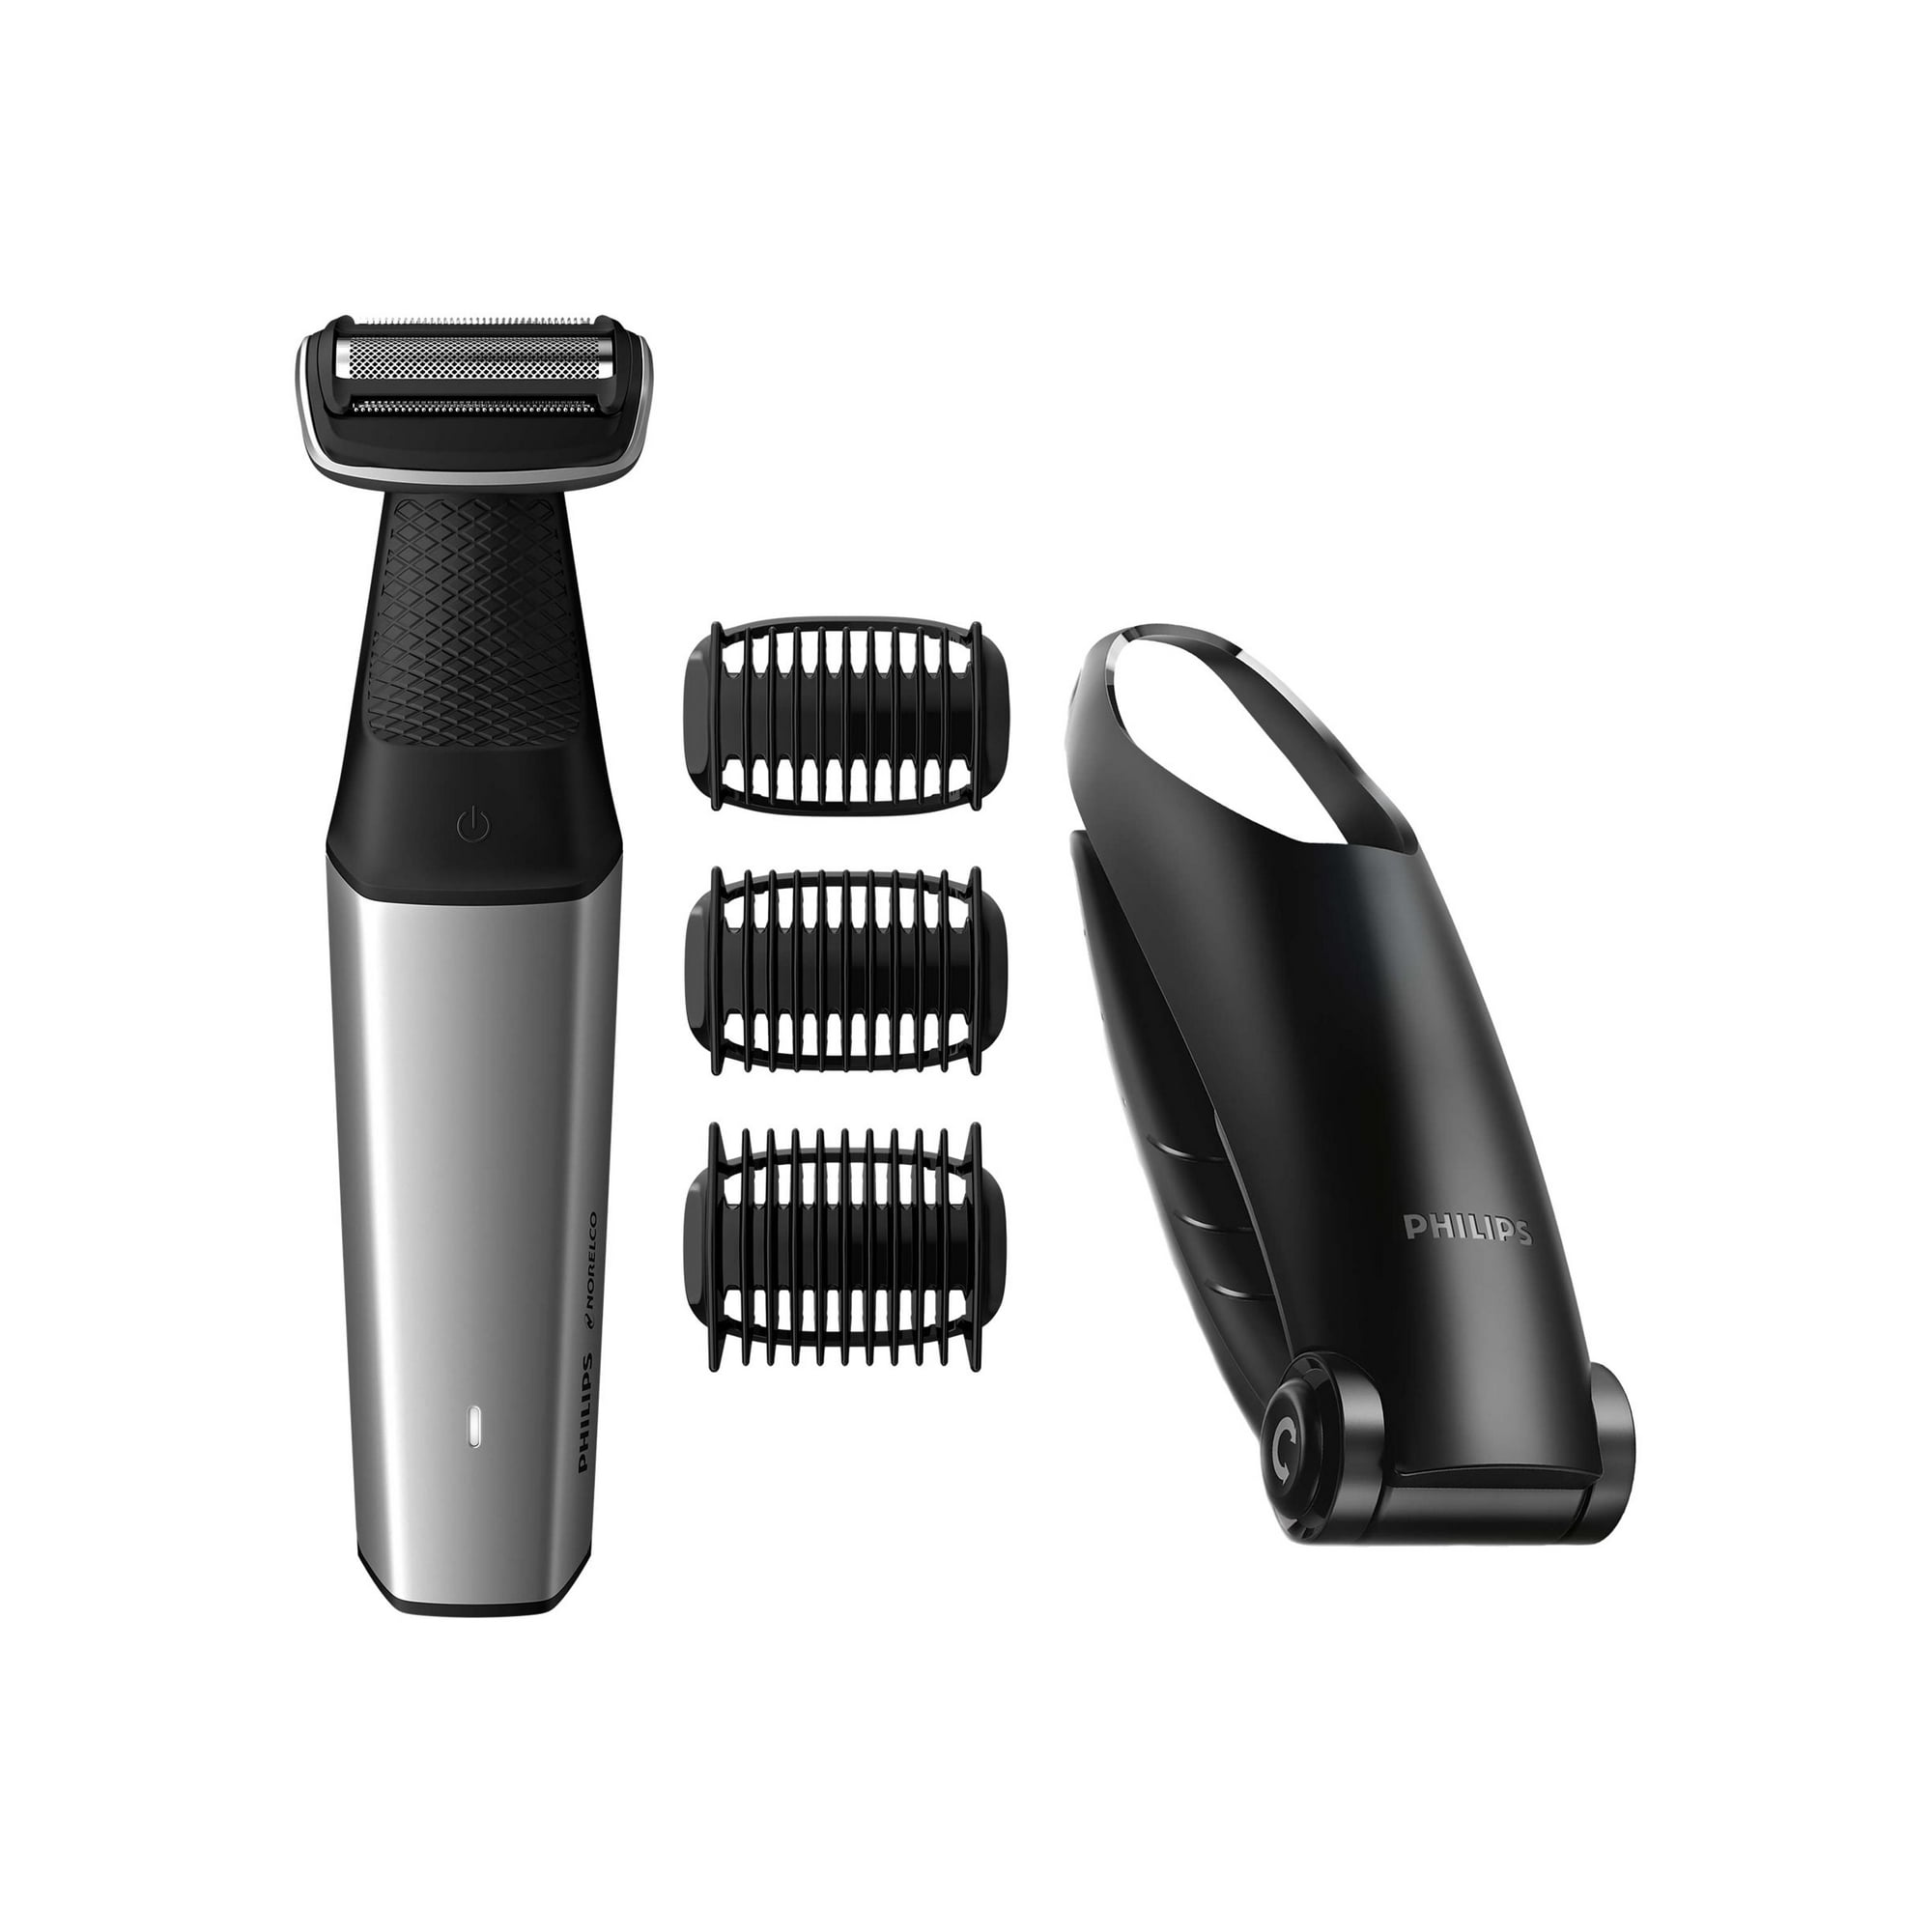 Philips Norelco Bodygroom Series 3500, Showerproof Lithium-Ion Body Hair  Trimmer for Men with Back Shaver, BG5025/49 | Walmart Canada